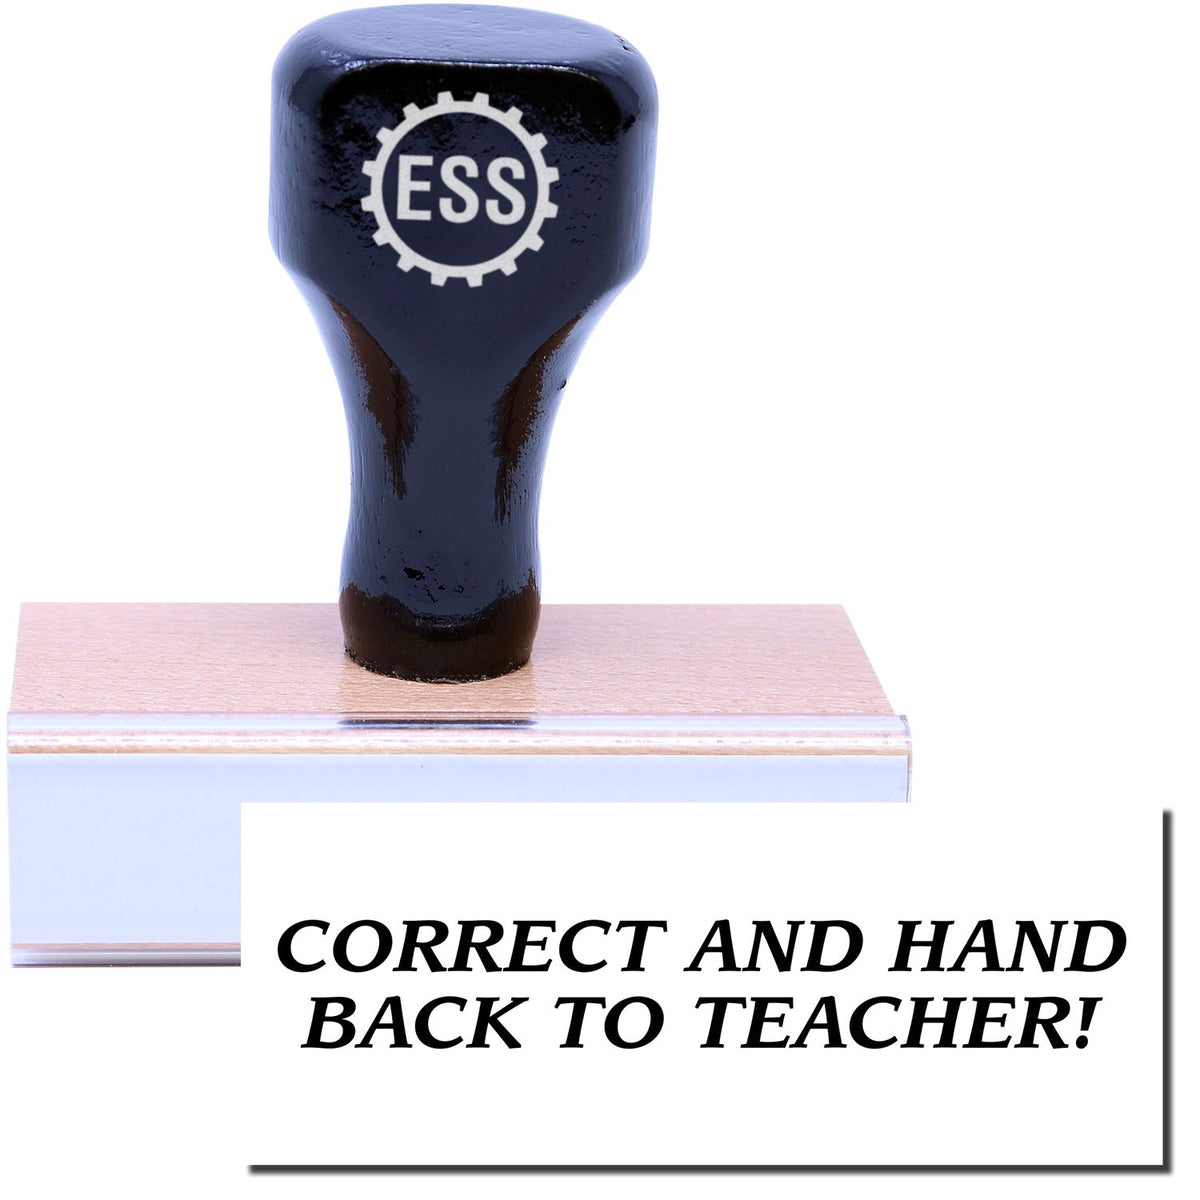 A stock office rubber stamp with a stamped image showing how the text &quot;CORRECT AND HAND BACK TO TEACHER!&quot; is displayed after stamping.